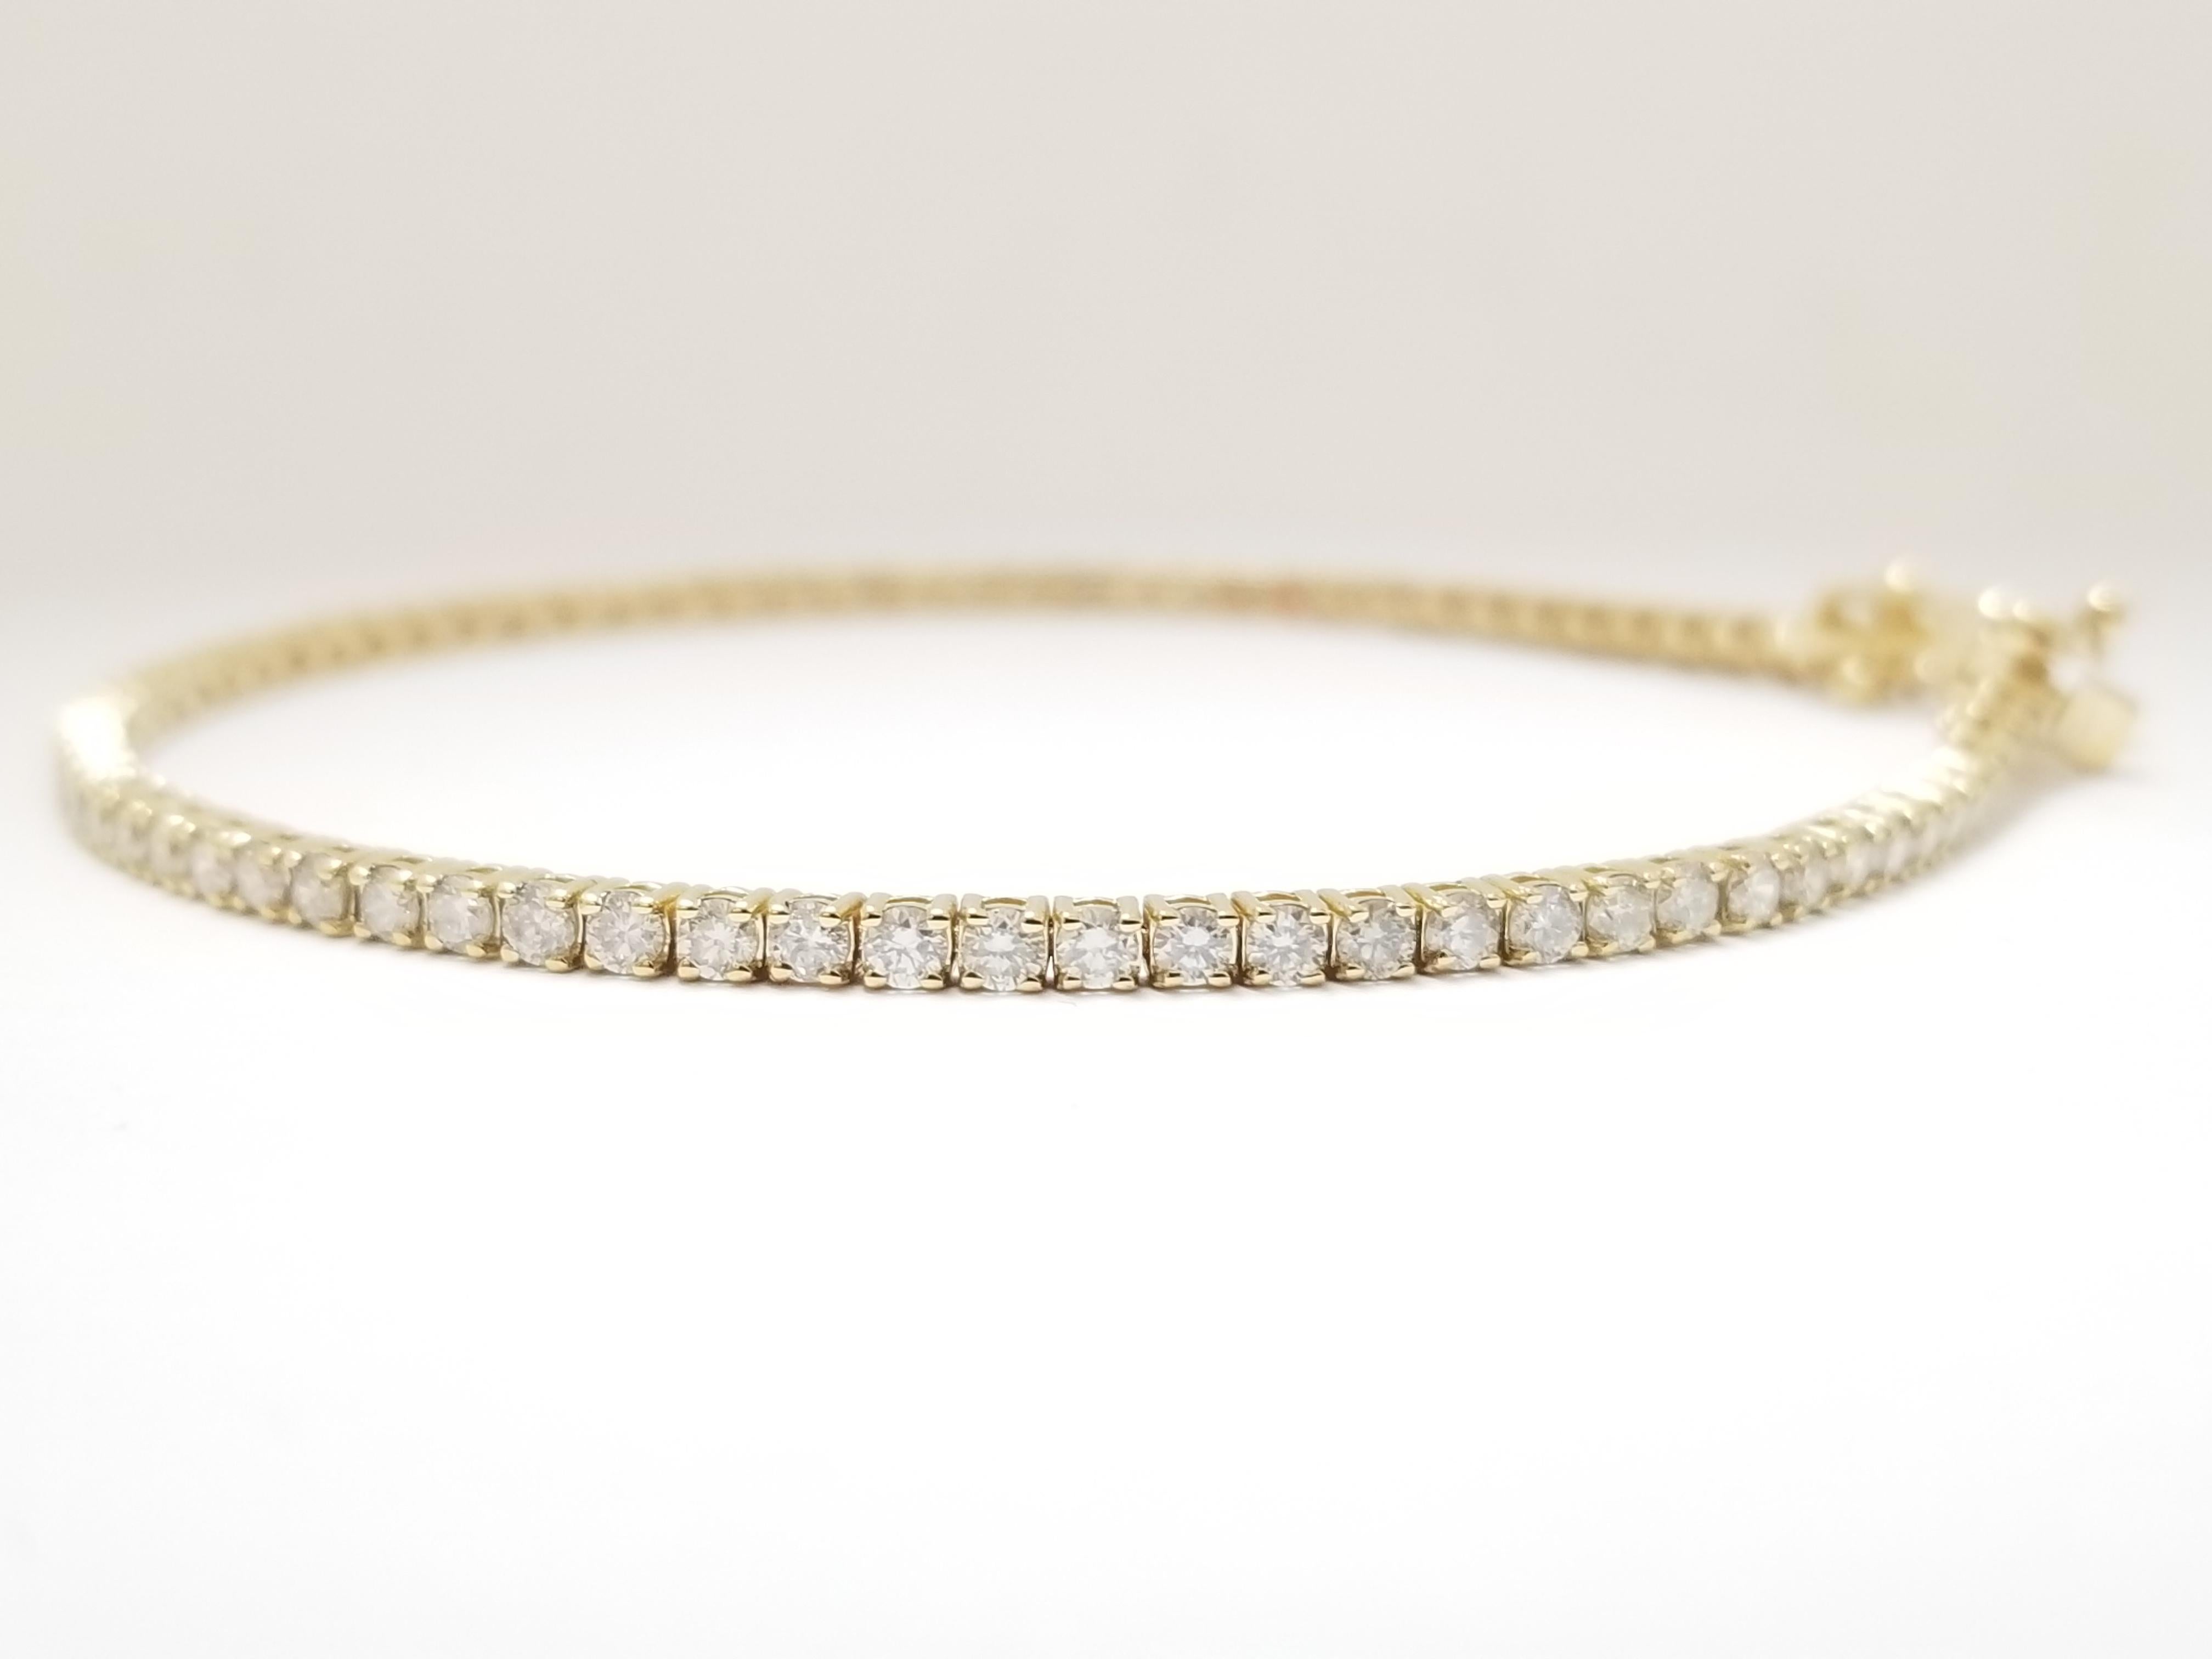 A quality tennis bracelet, natural round-brilliant cut diamonds. 2.50 carats. set on 14k yellow gold. each stone is set in a classic four-prong style for maximum light brilliance. double-latch safety. Push-button clasp.

7 inch length.  
Average